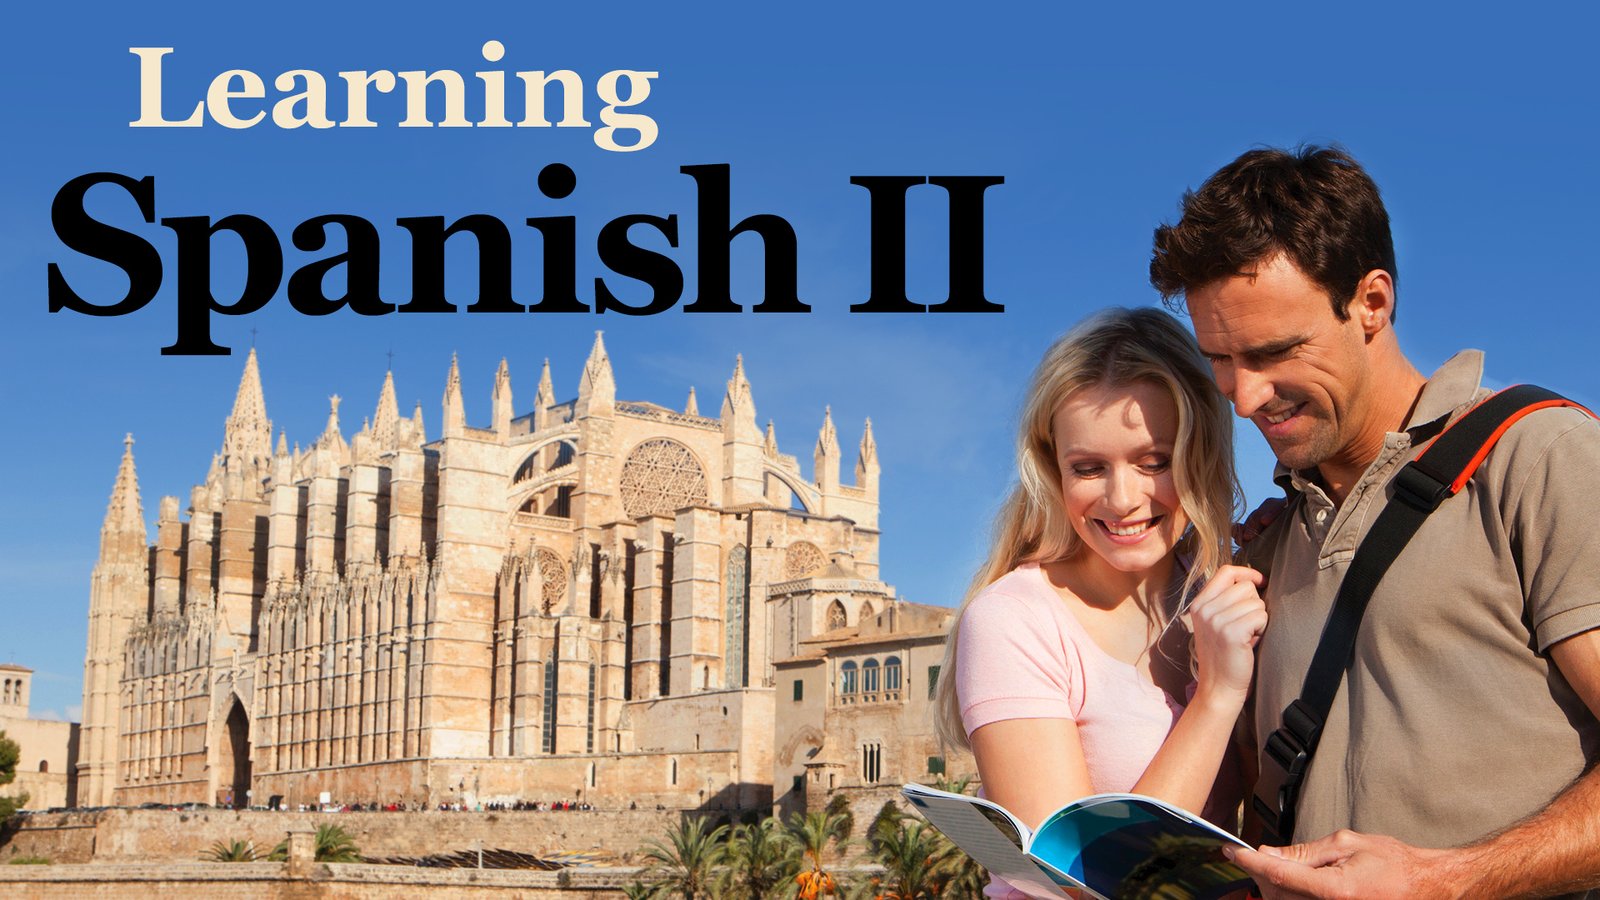 Learning Spanish II: How to Understand and Speak a New Language